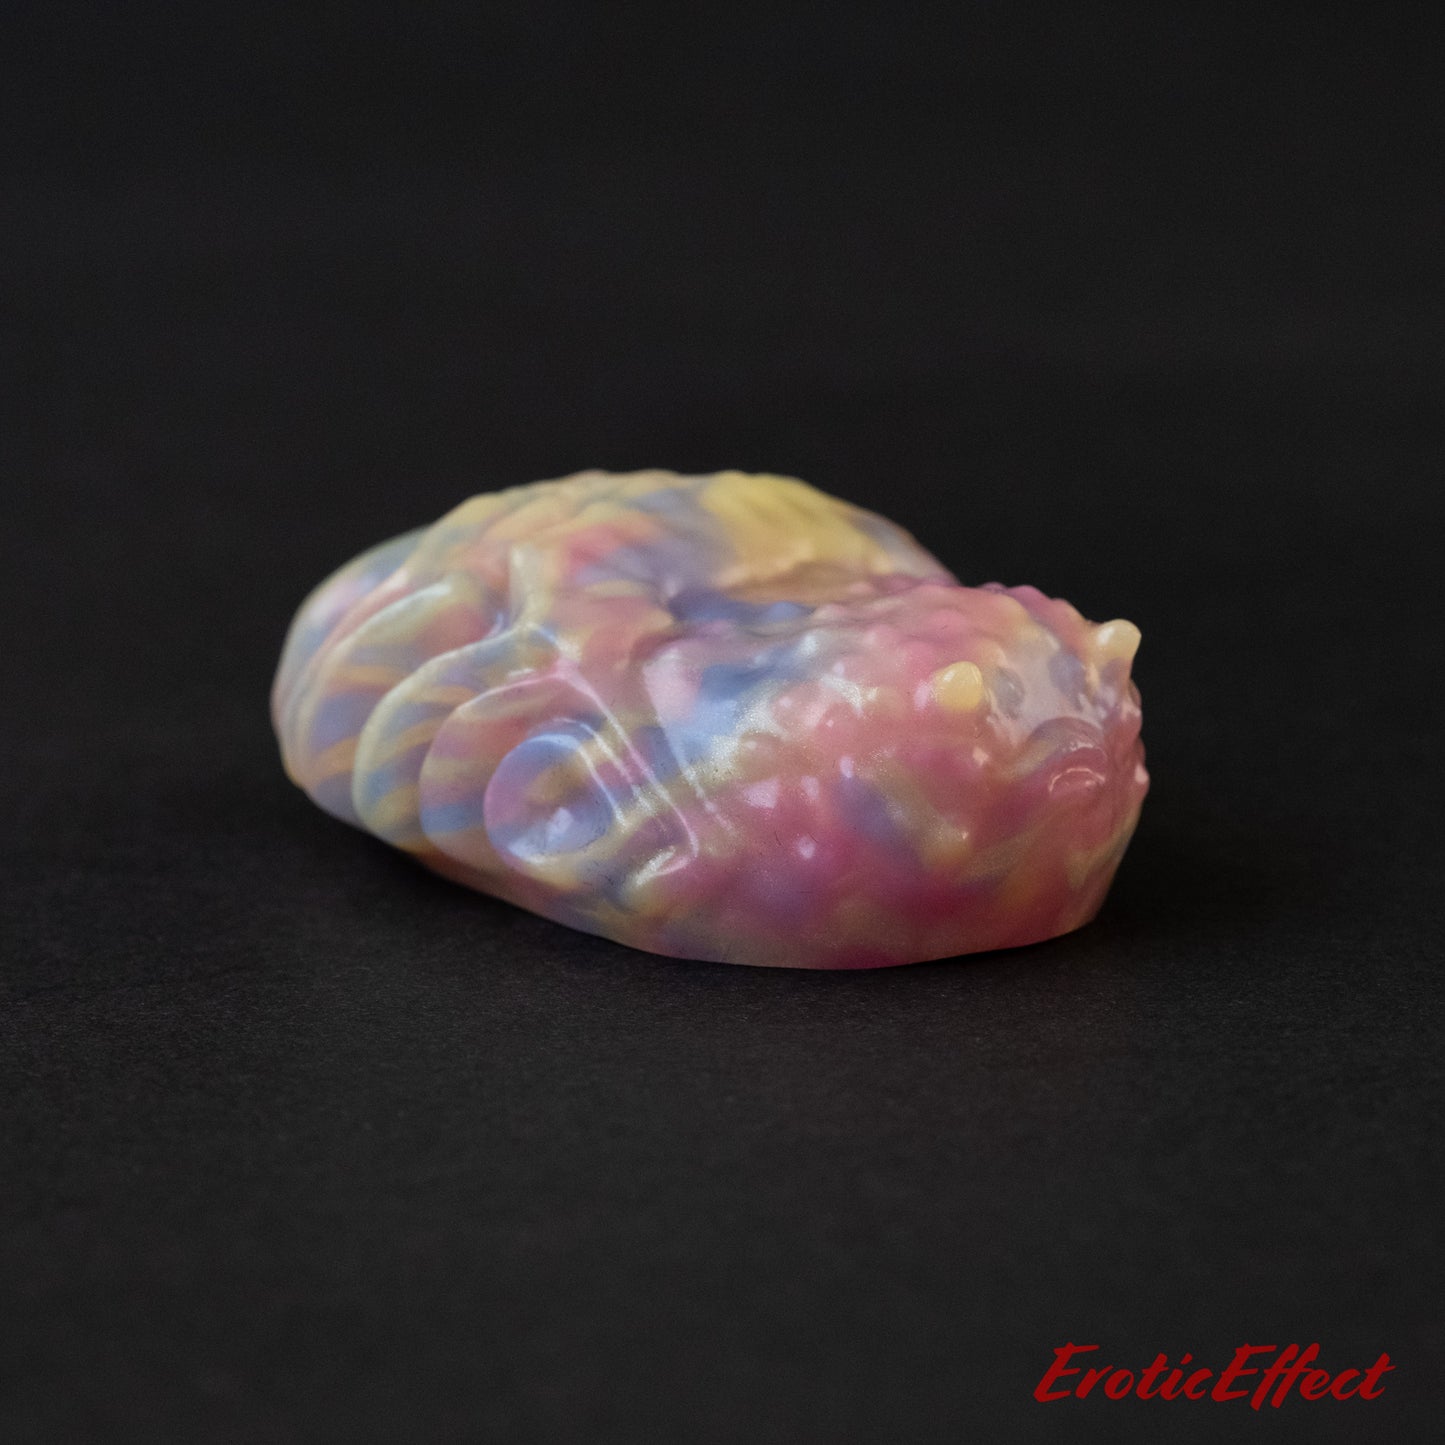 Edgar Silicone Grindable/Squishy - Pink/Yellow/Blue Shimmer - Medium Firmness